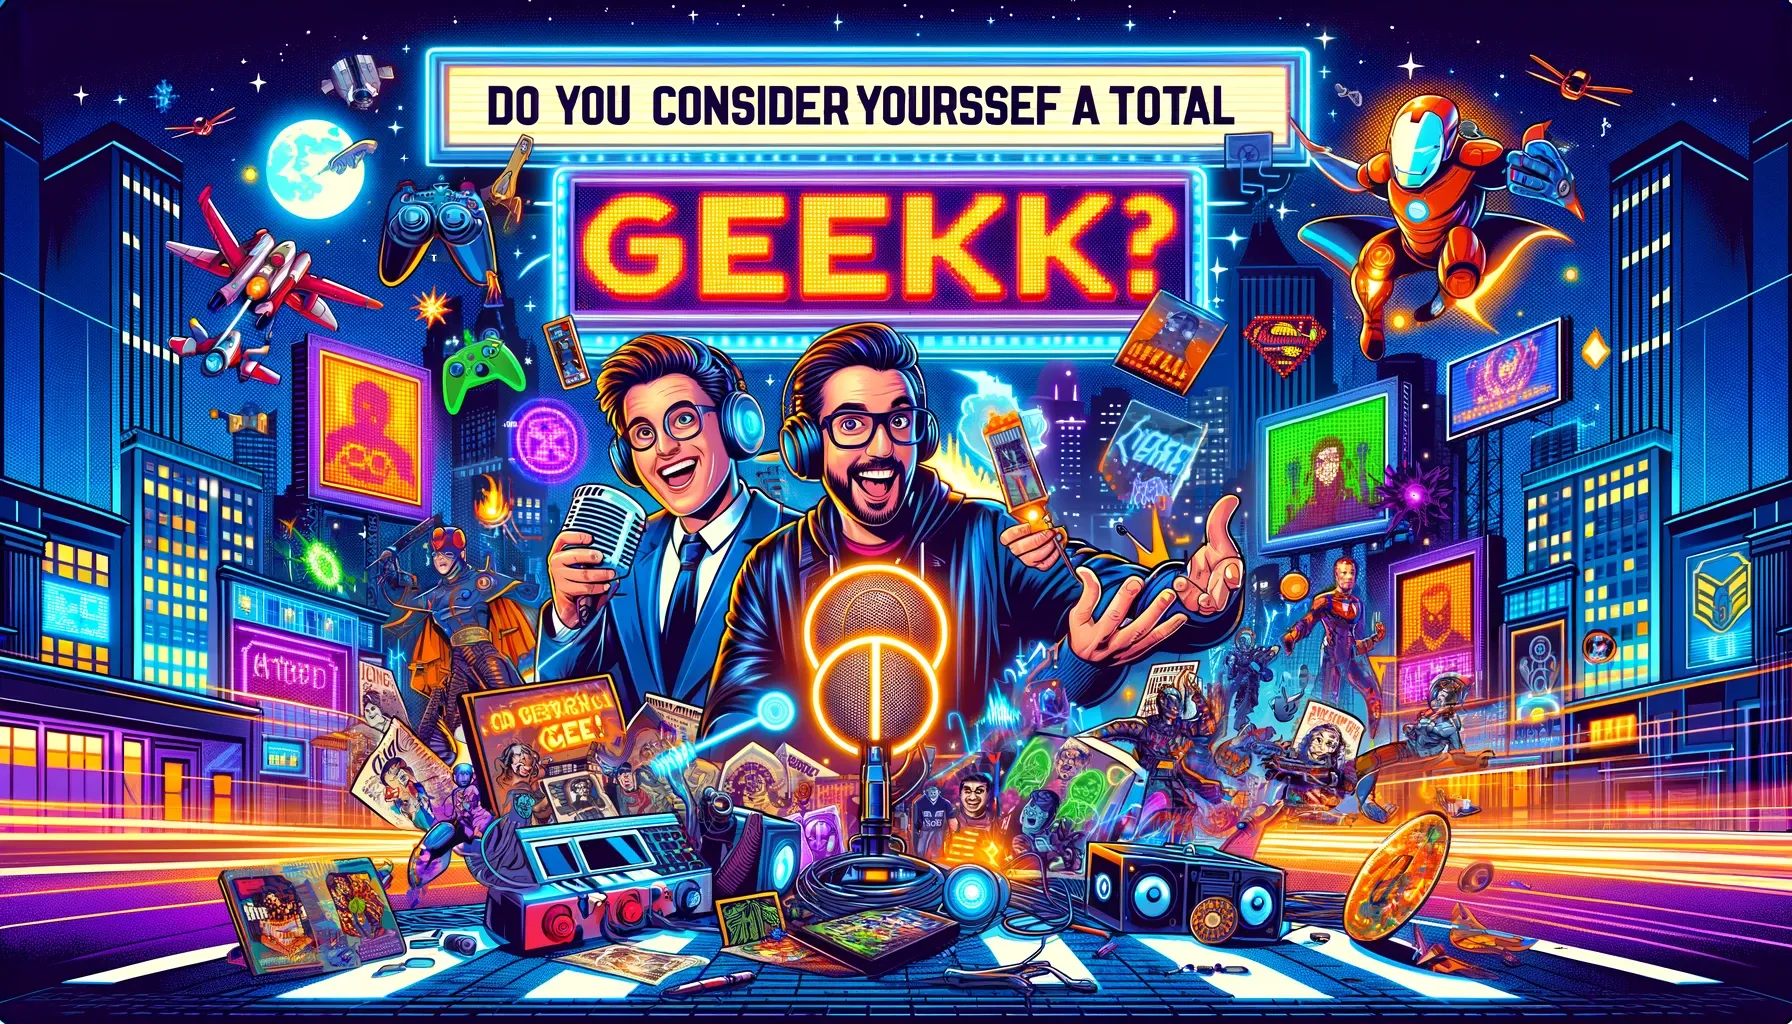 Geekzilla Podcast: The Ultimate Destination for Geeks